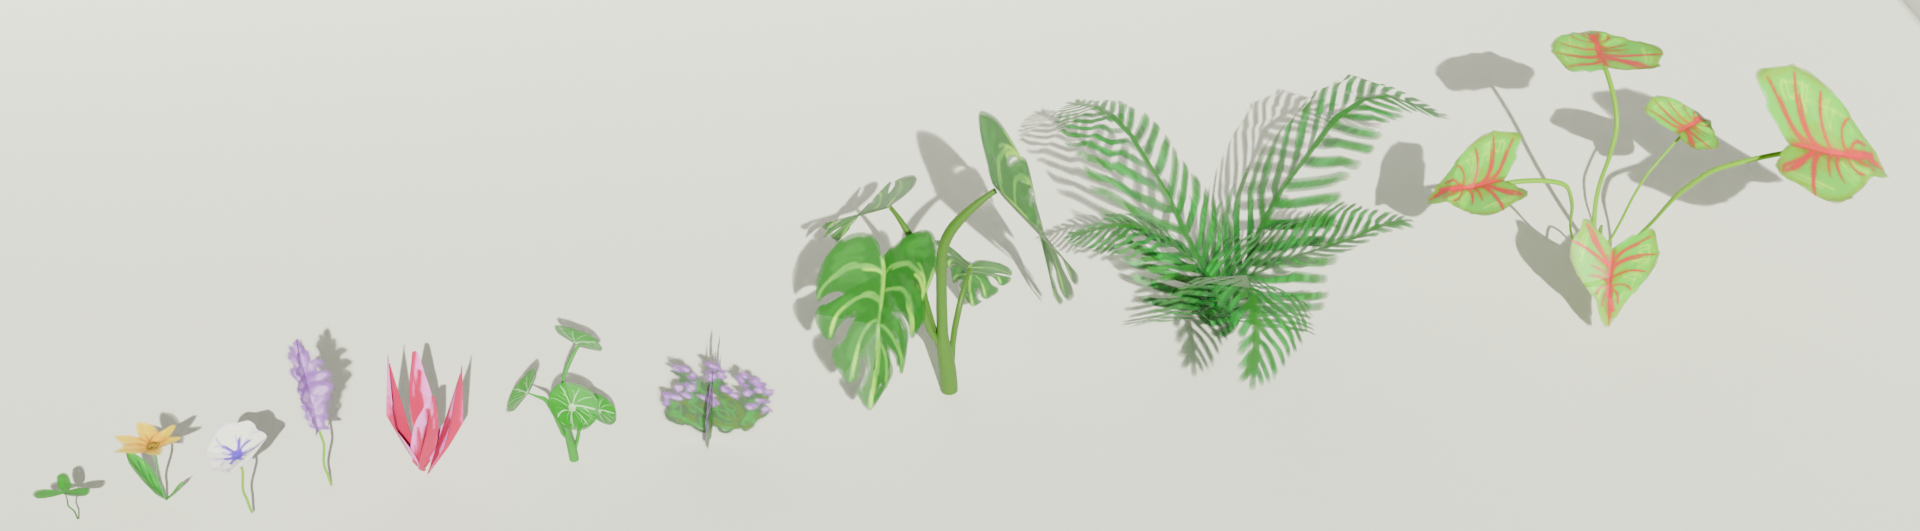 Hand painted plants assets